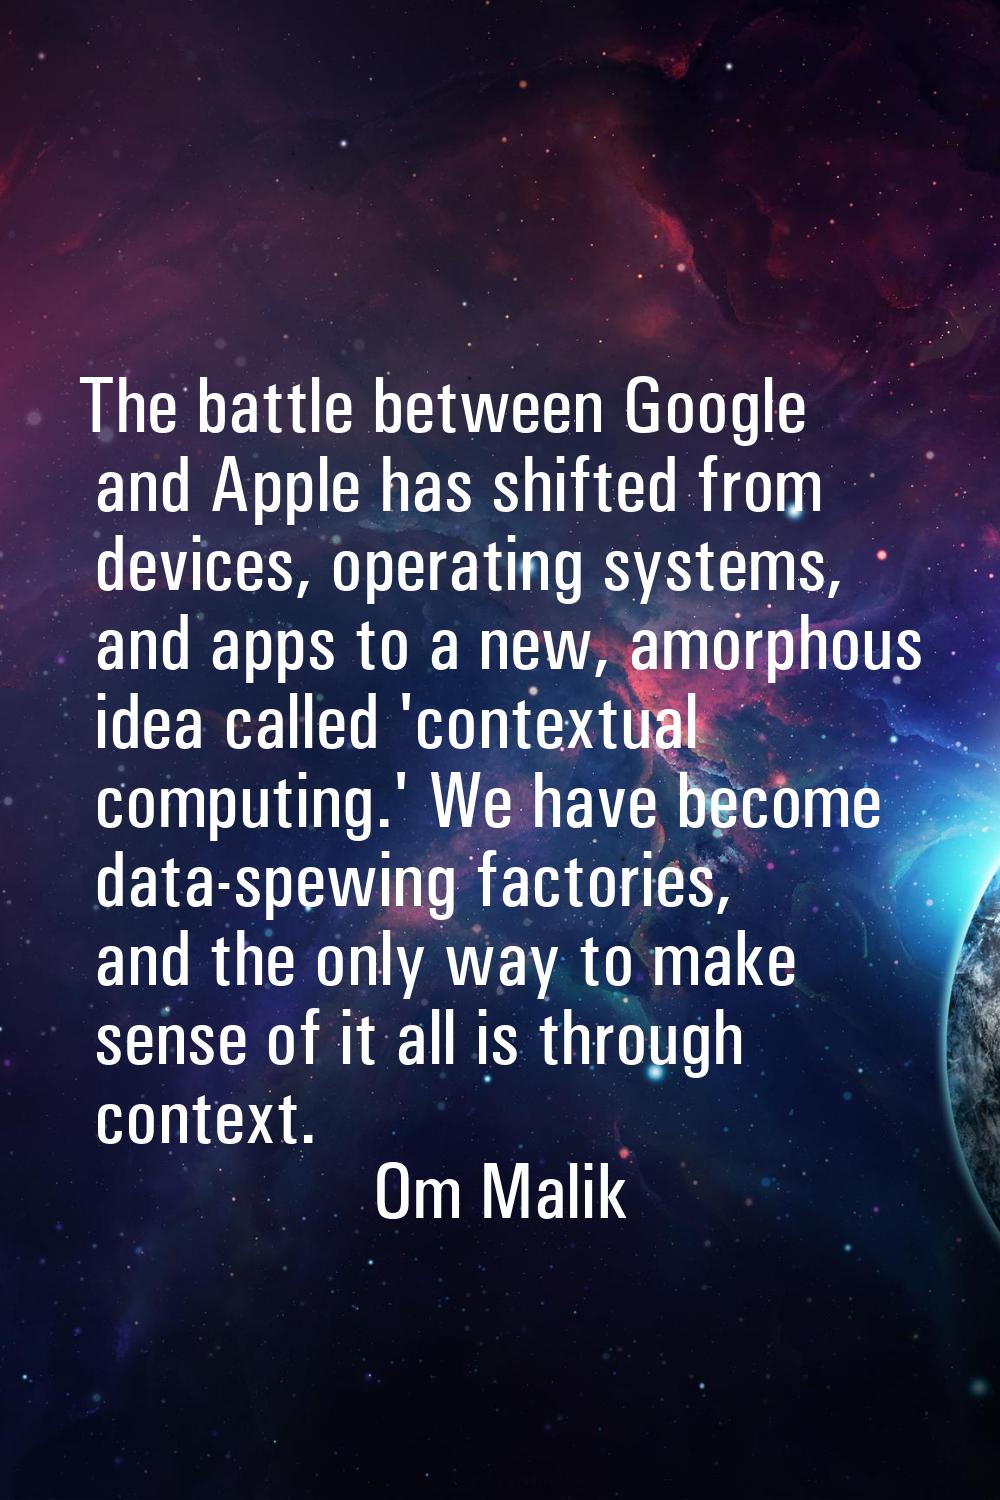 The battle between Google and Apple has shifted from devices, operating systems, and apps to a new,